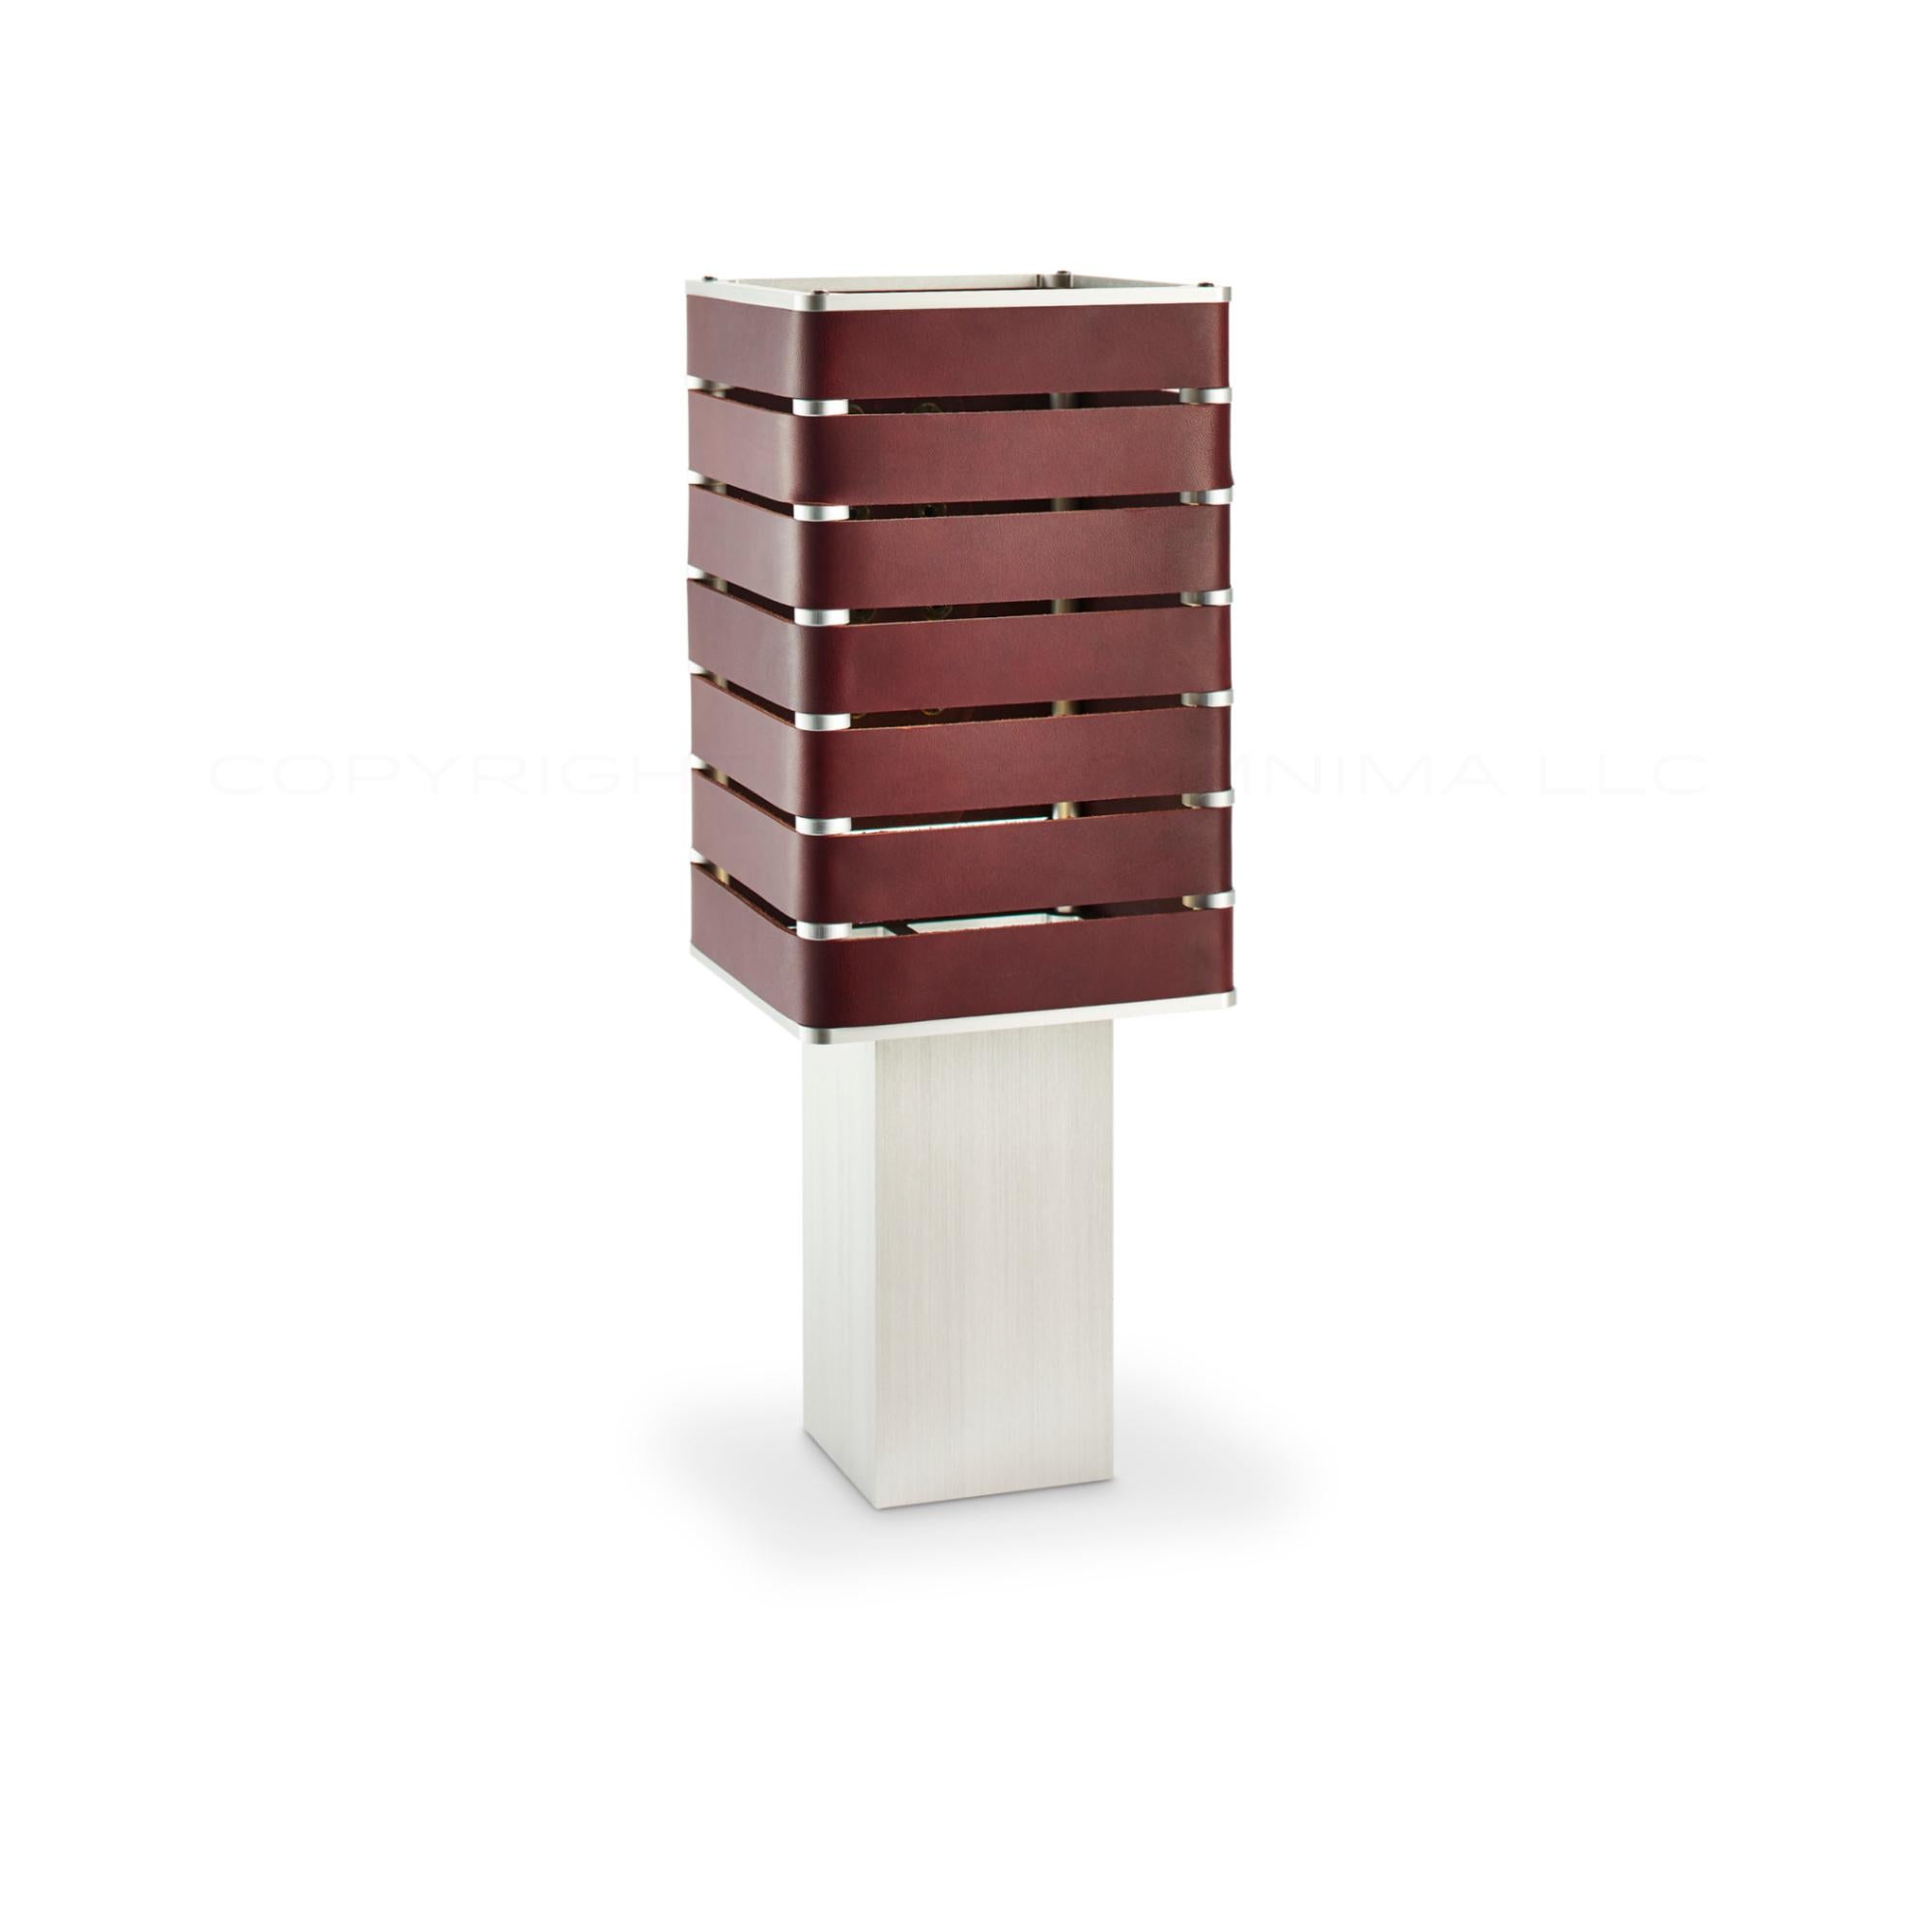 Modern, Minimal, Solid Metal Table Light in Siena Brown Italian Leather with Antique Brass Snaps.

Introducing Exigen, the customizable lighting platform from mnima.  Presented in an array of crisp, eye-catching colors, Exigen offers maximum